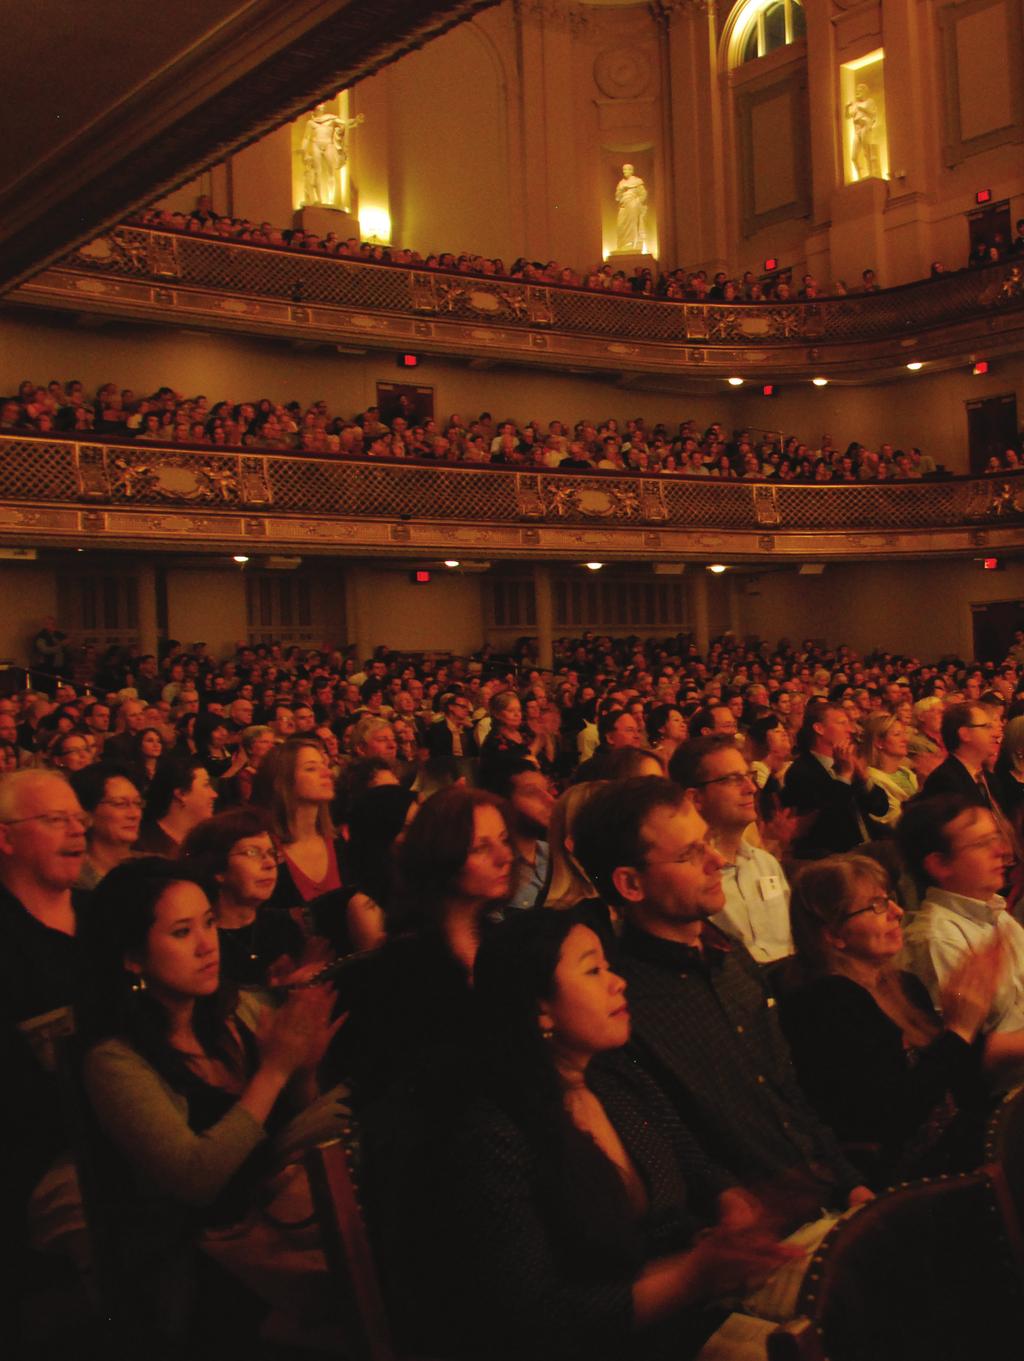 Sold out H&H performance at Symphony Hall.